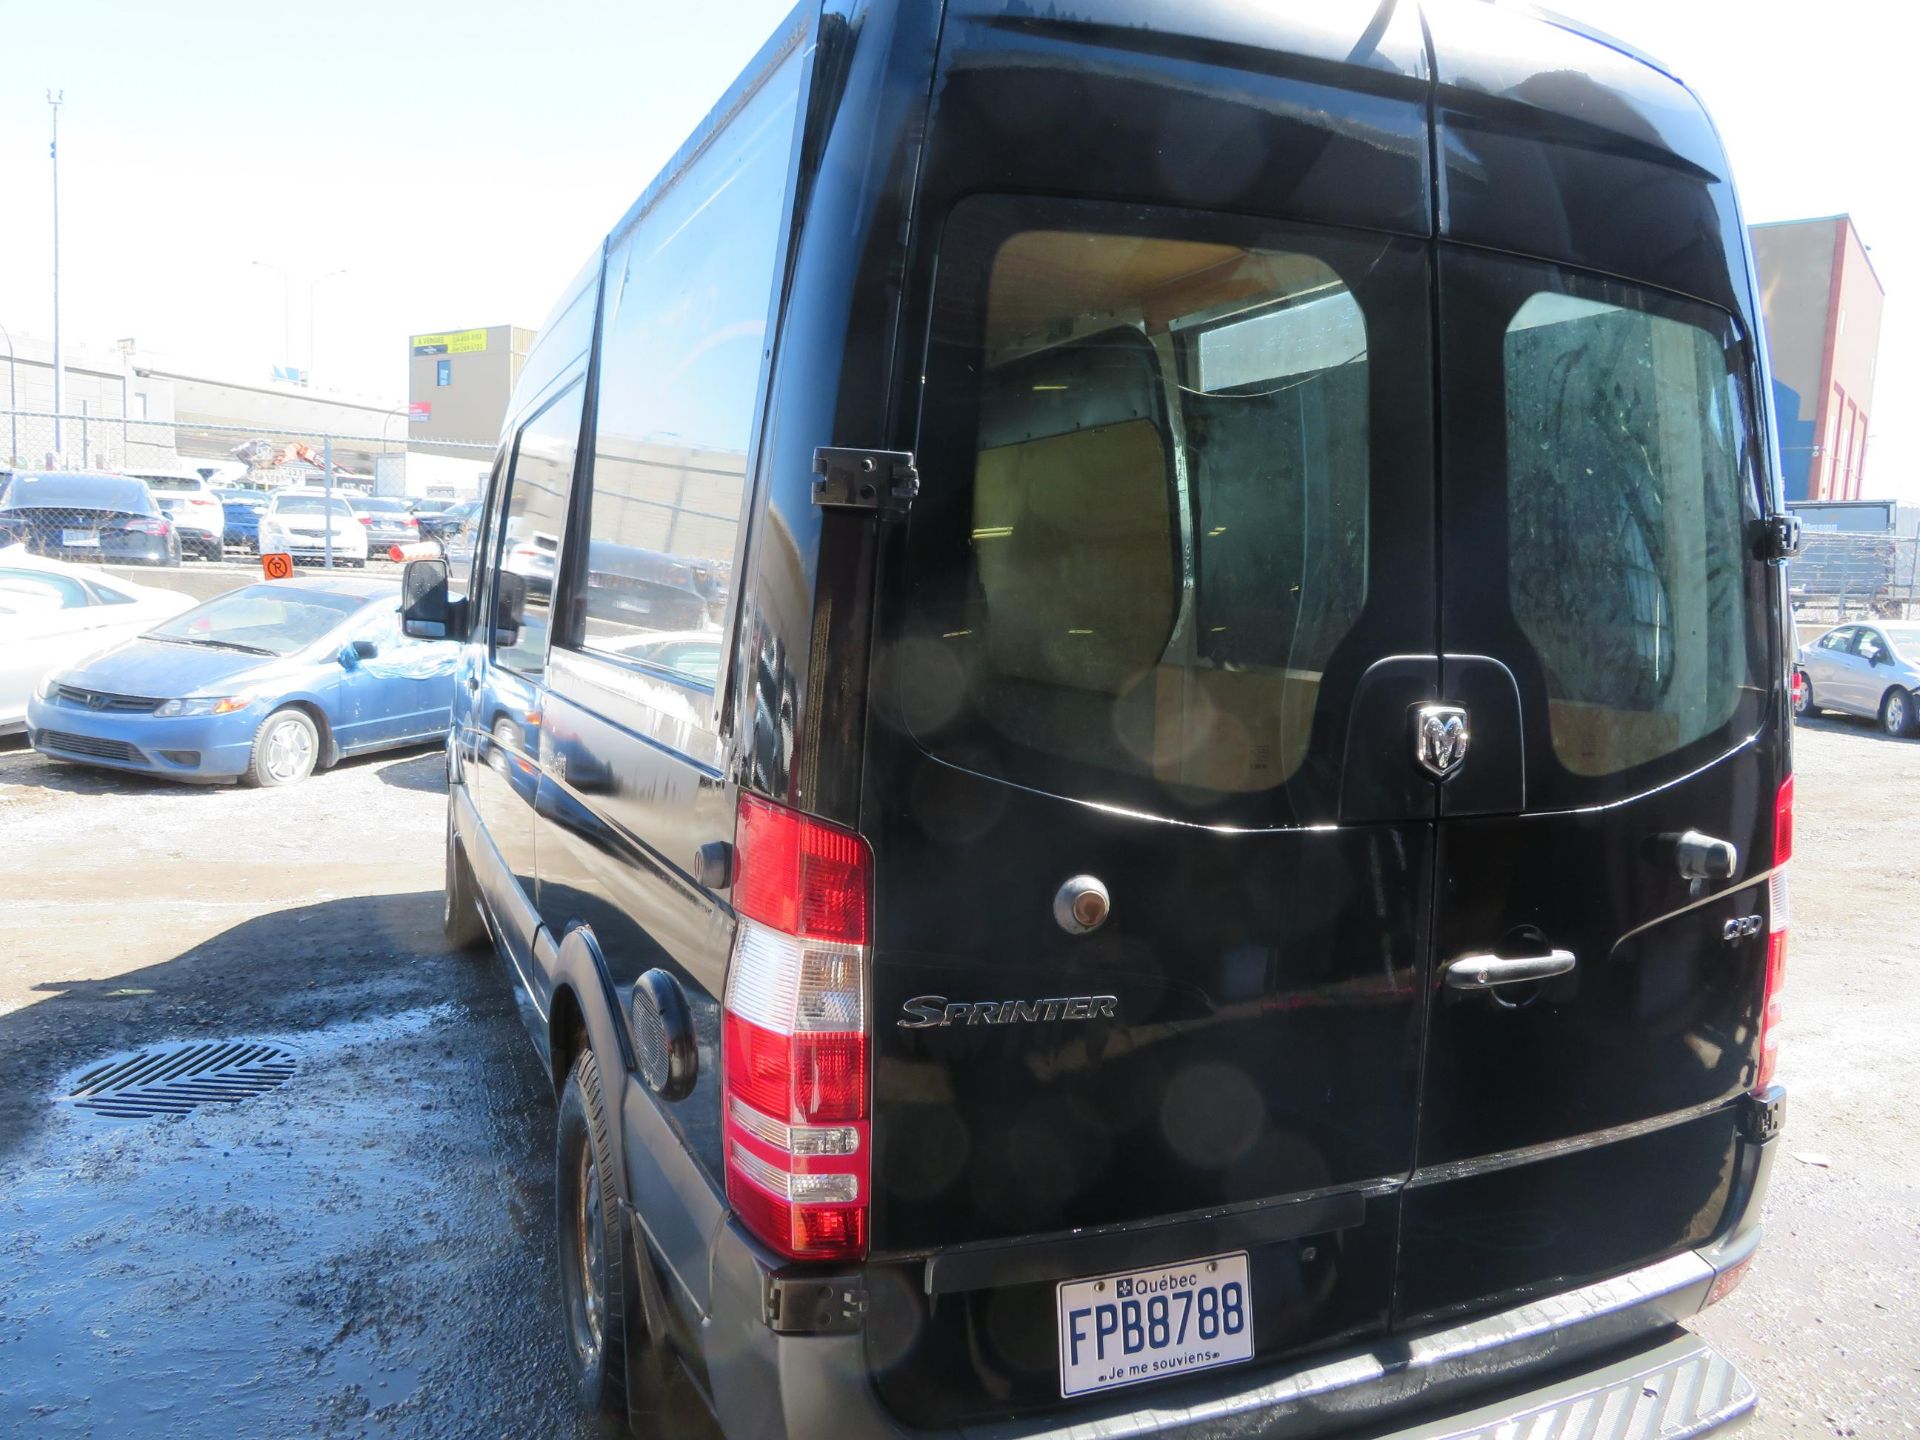 DODGE Sprinter 2007 CRD, 170 000 KM, Diesel, 3.0 L, Automatic, 18ft long, air (walk-in) VIN: - Image 3 of 8